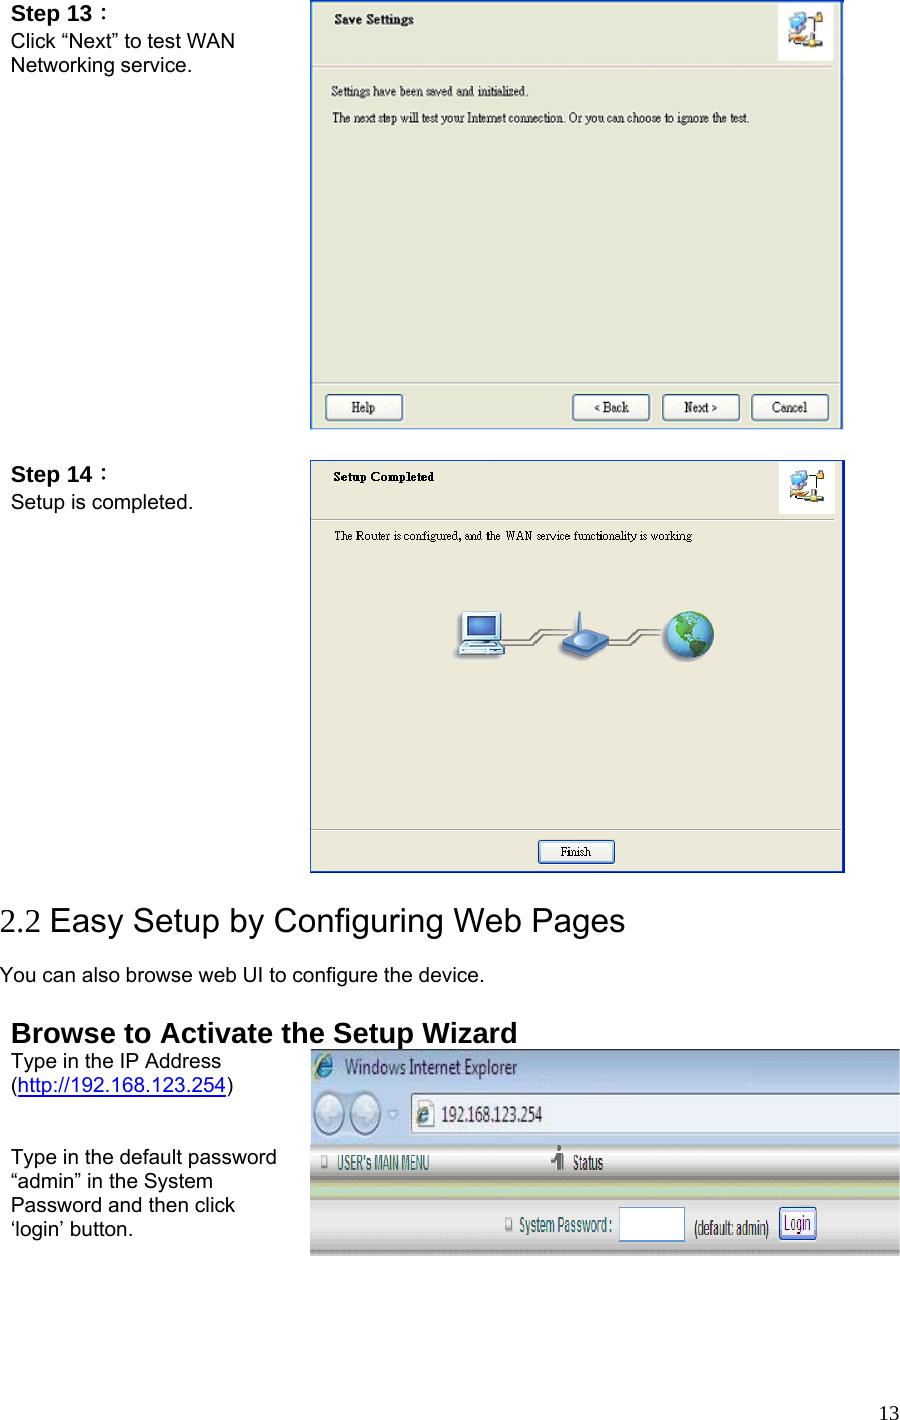  13Step 13： Click “Next” to test WAN Networking service.   Step 14： Setup is completed.   2.2 Easy Setup by Configuring Web Pages  You can also browse web UI to configure the device.  Browse to Activate the Setup Wizard Type in the IP Address (http://192.168.123.254)   Type in the default password “admin” in the System Password and then click ‘login’ button. 